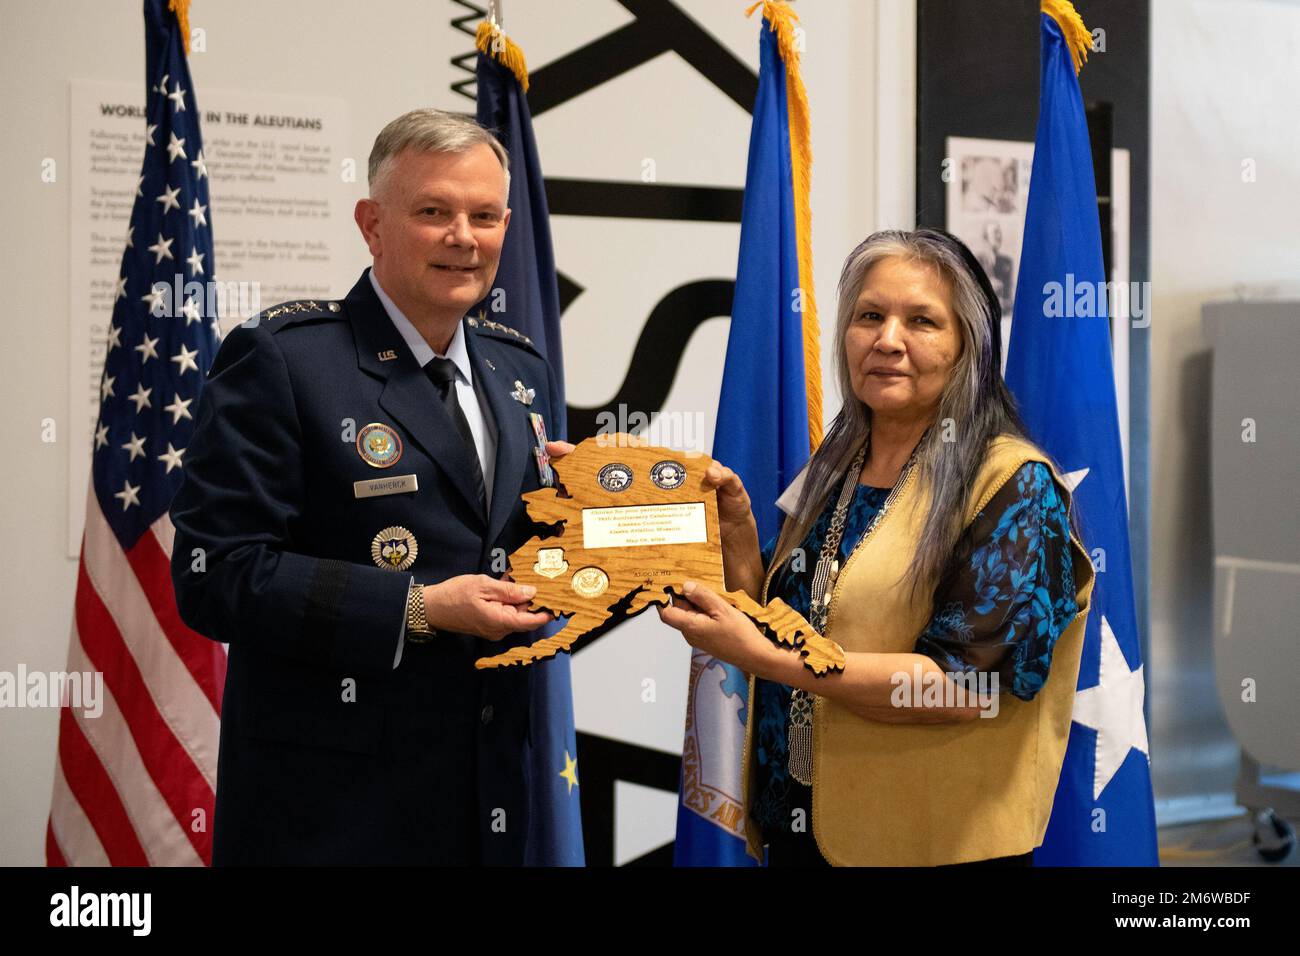 Gen. Glen VanHerck, Commander, North American Aerospace Defense Command and U.S. Northern Command, presented a gift to Marie Coleman, 2nd Chief, Native Village of Eklutna, Alaska, before providing the keynote address highlighting the 75th Anniversary of Alaskan Command, a USNORTHCOM subordinate unified command, at the Alaska Aviation Museum, Anchorage, Alaska, May 6, 2022. Ms. Coleman was the guest speaker for the event. (Department of Defense photo by Chuck Marsh) Stock Photo